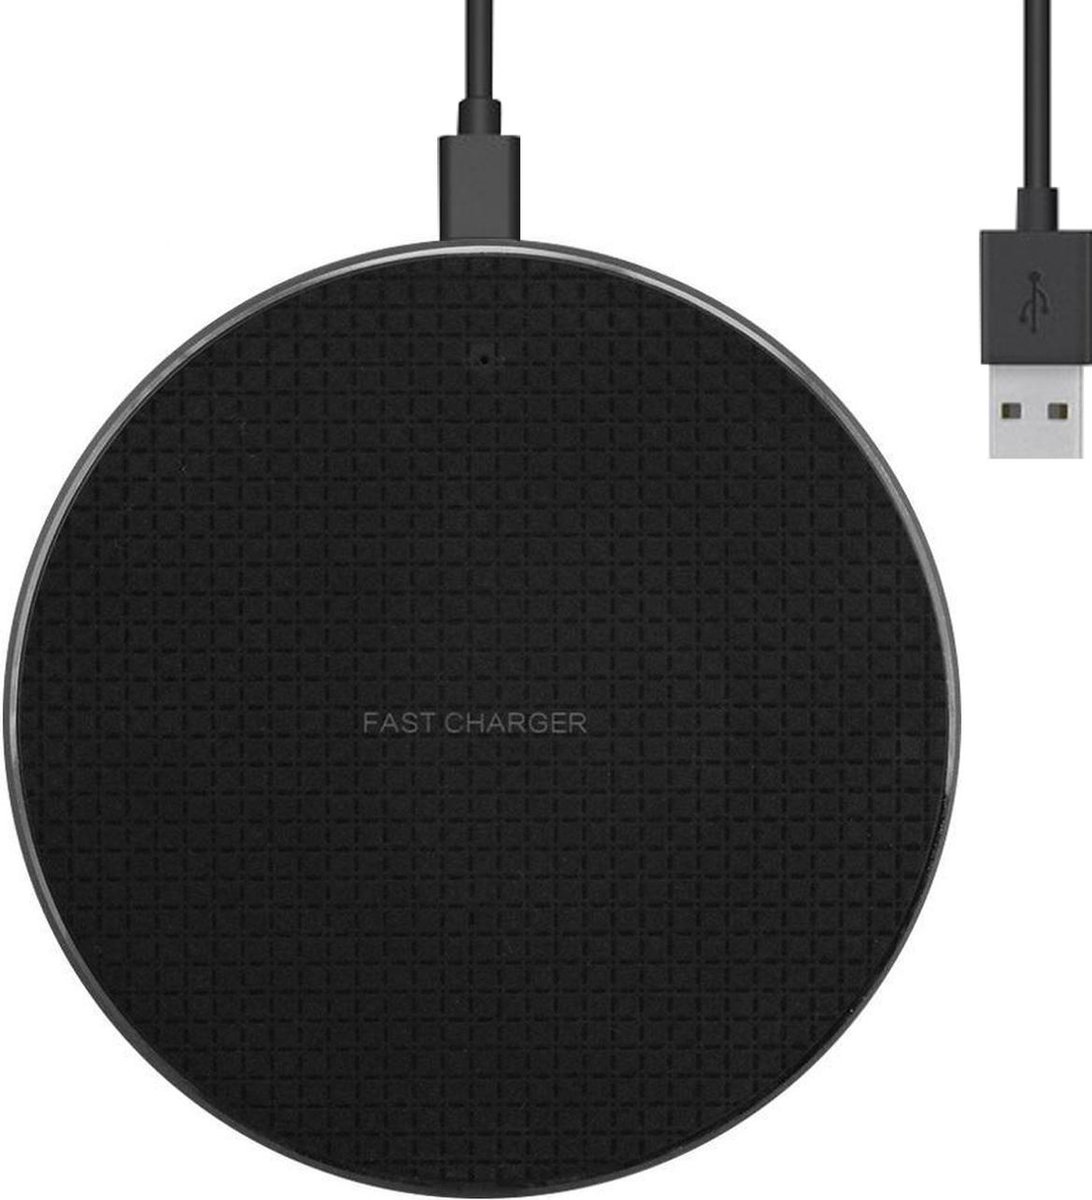 The Life Style Goods - Draadloze Oplader 10W - Inclusief Kabel - Wireless Charger - Fast Charger - iPhone en Samsung - The Life Style Goods